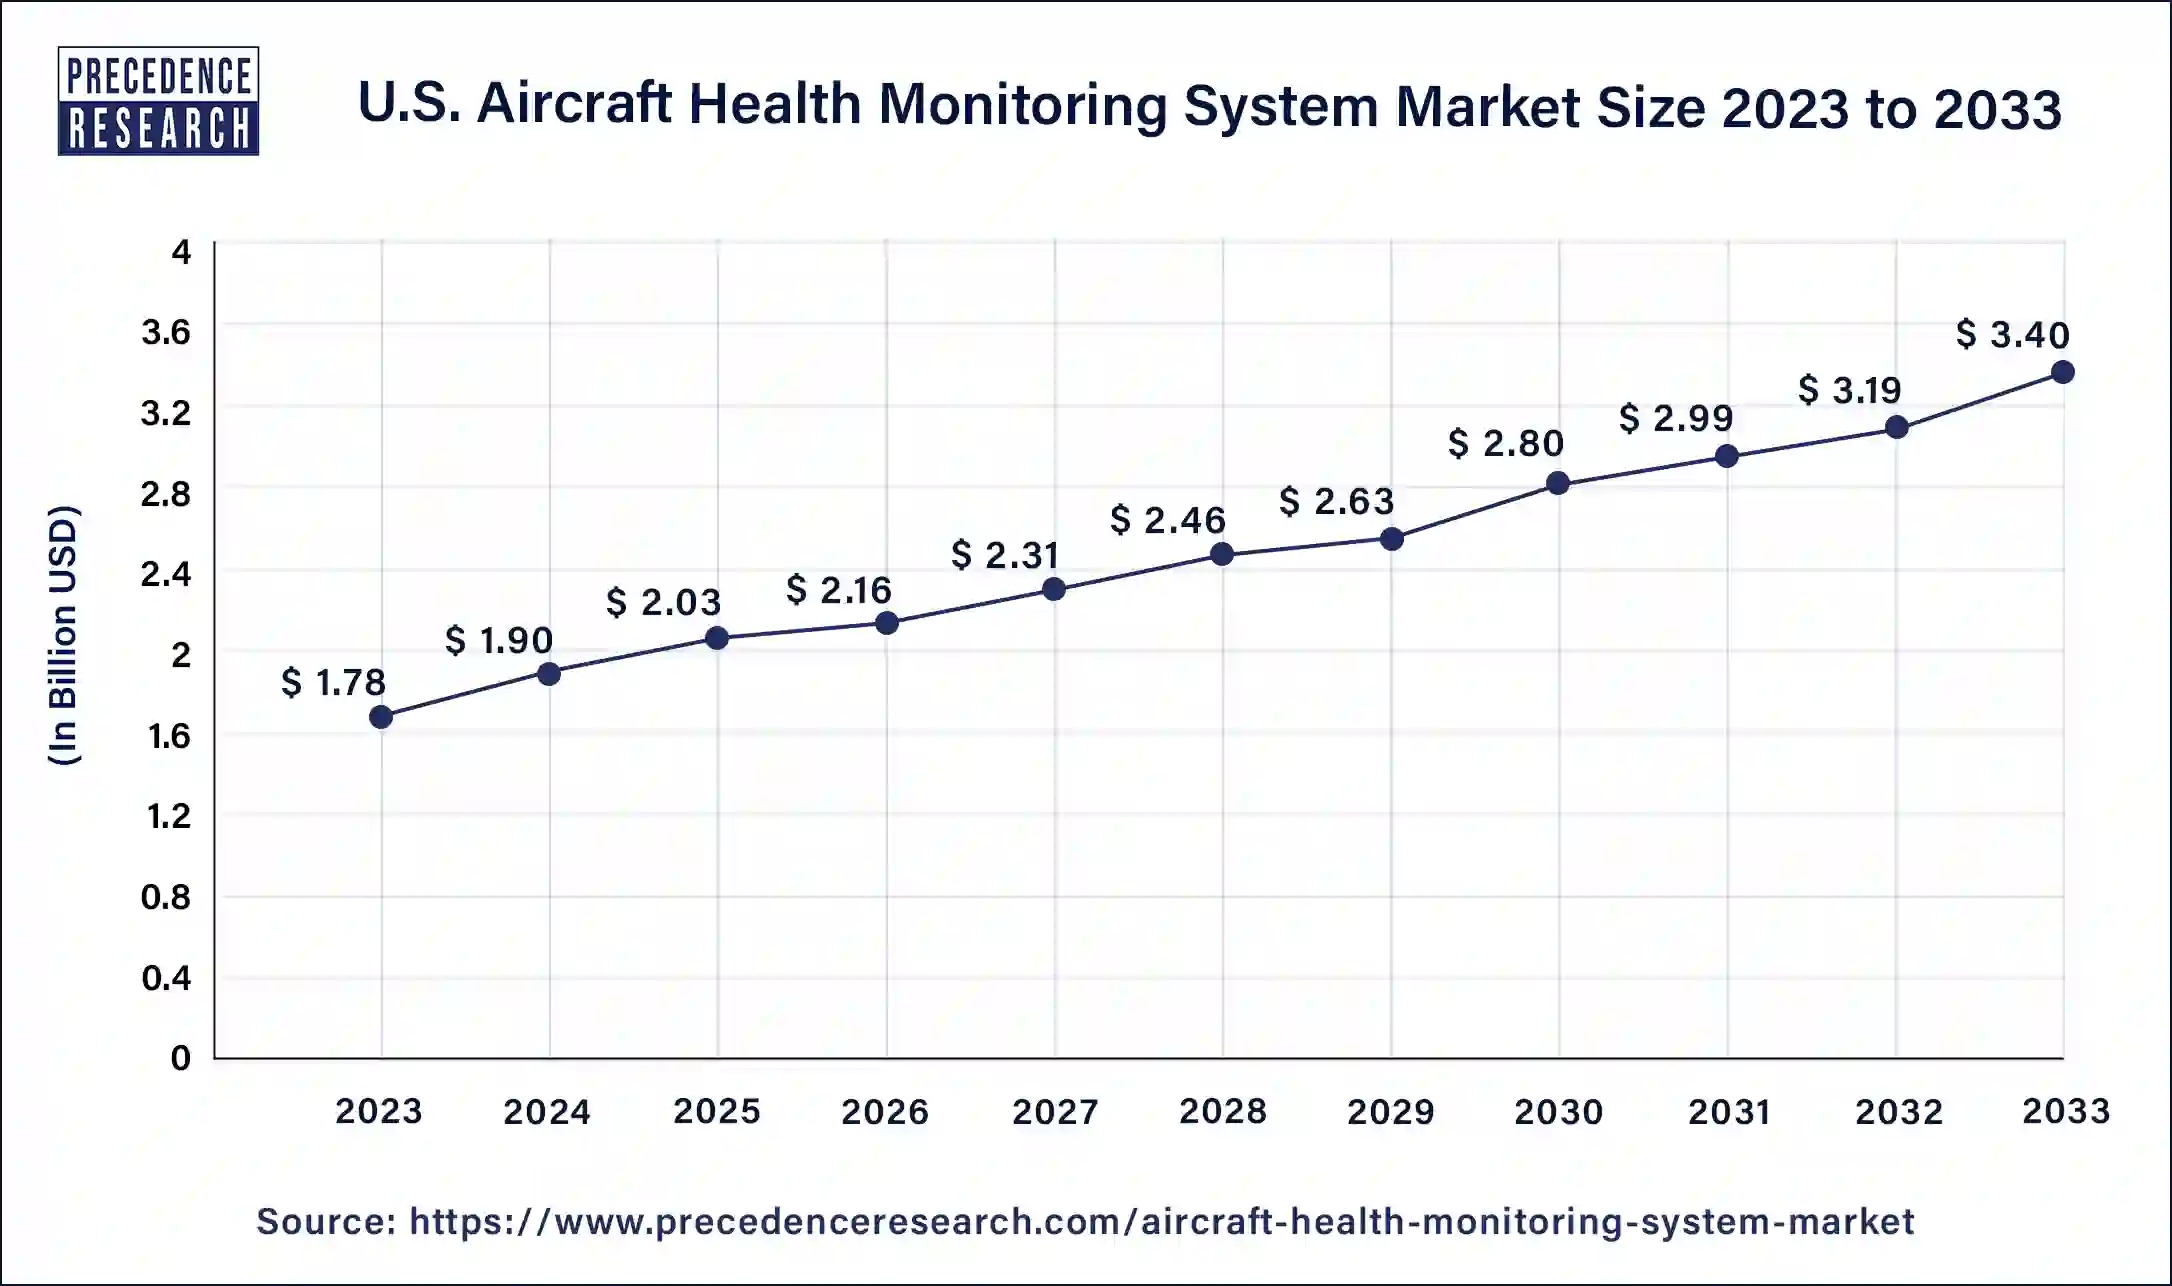 U.S. Aircraft Health Monitoring System Market Size 2024 to 2033